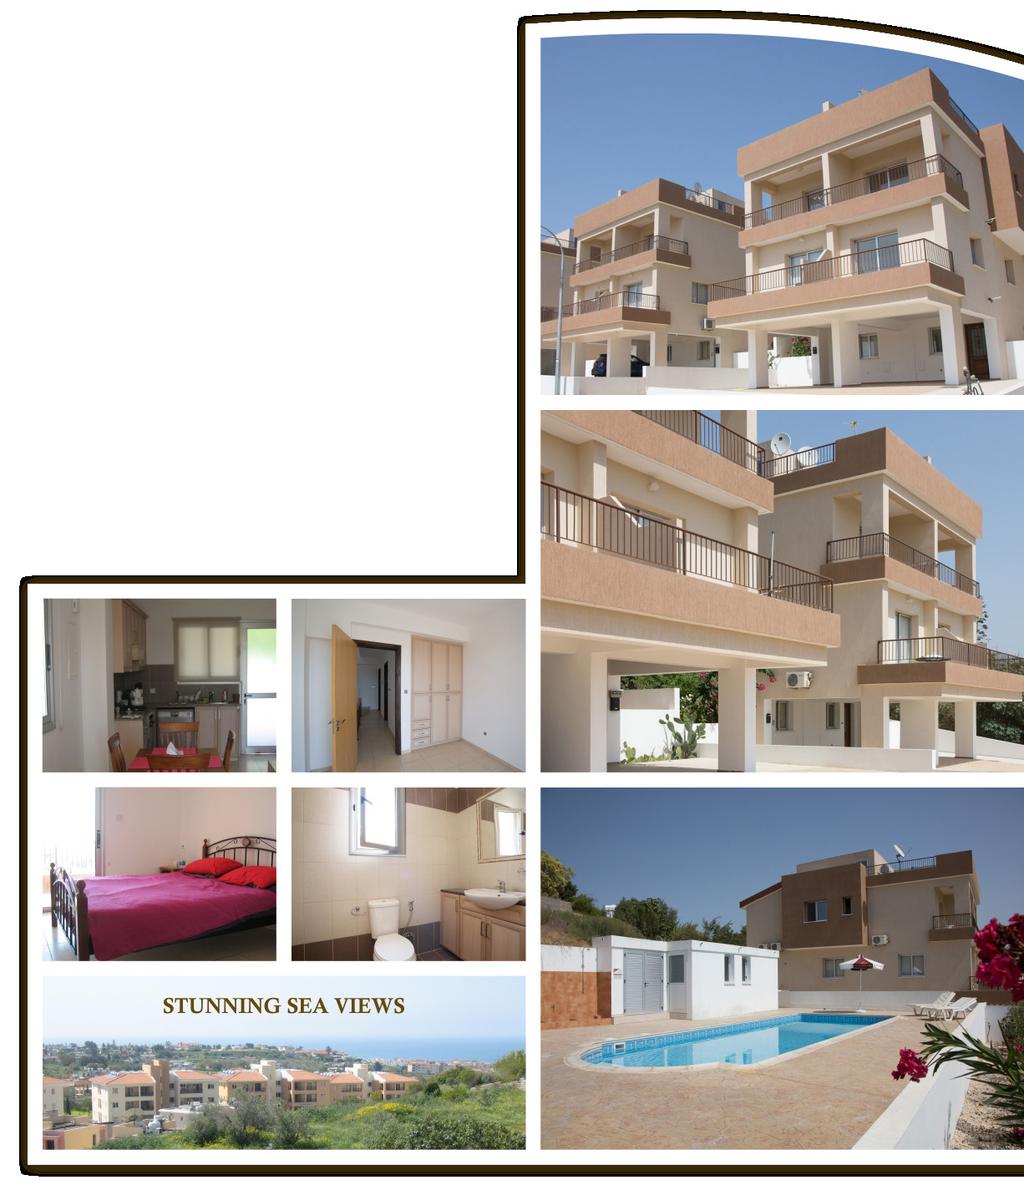 RESALE PROPERTIES MELANOS HEIGHTS 2 - Townhouse A1 Townhouse A1 (SAVP#850) 3 Bedroom Townhouse with Studio Apartment Chloraka Village 3